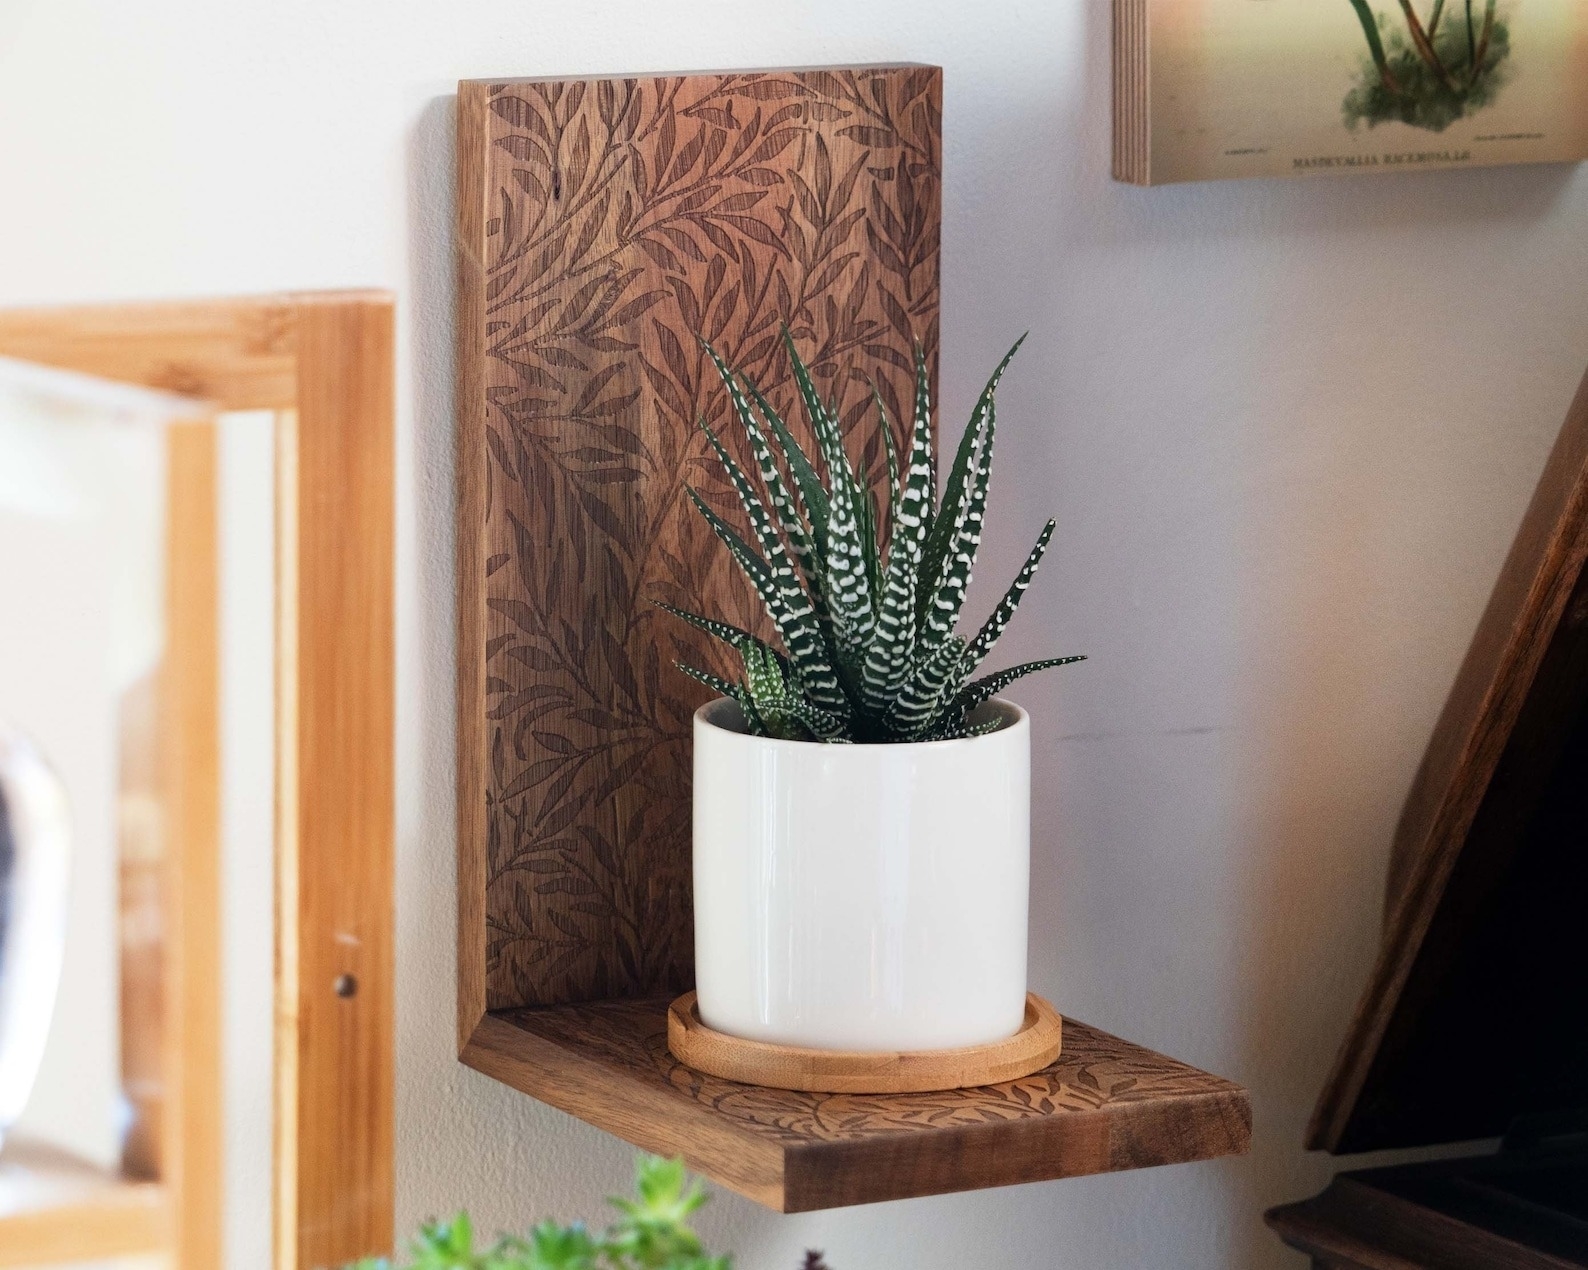 Succulent plant in a white pot on a wooden shelf against an engraved wall-mounted plant stand